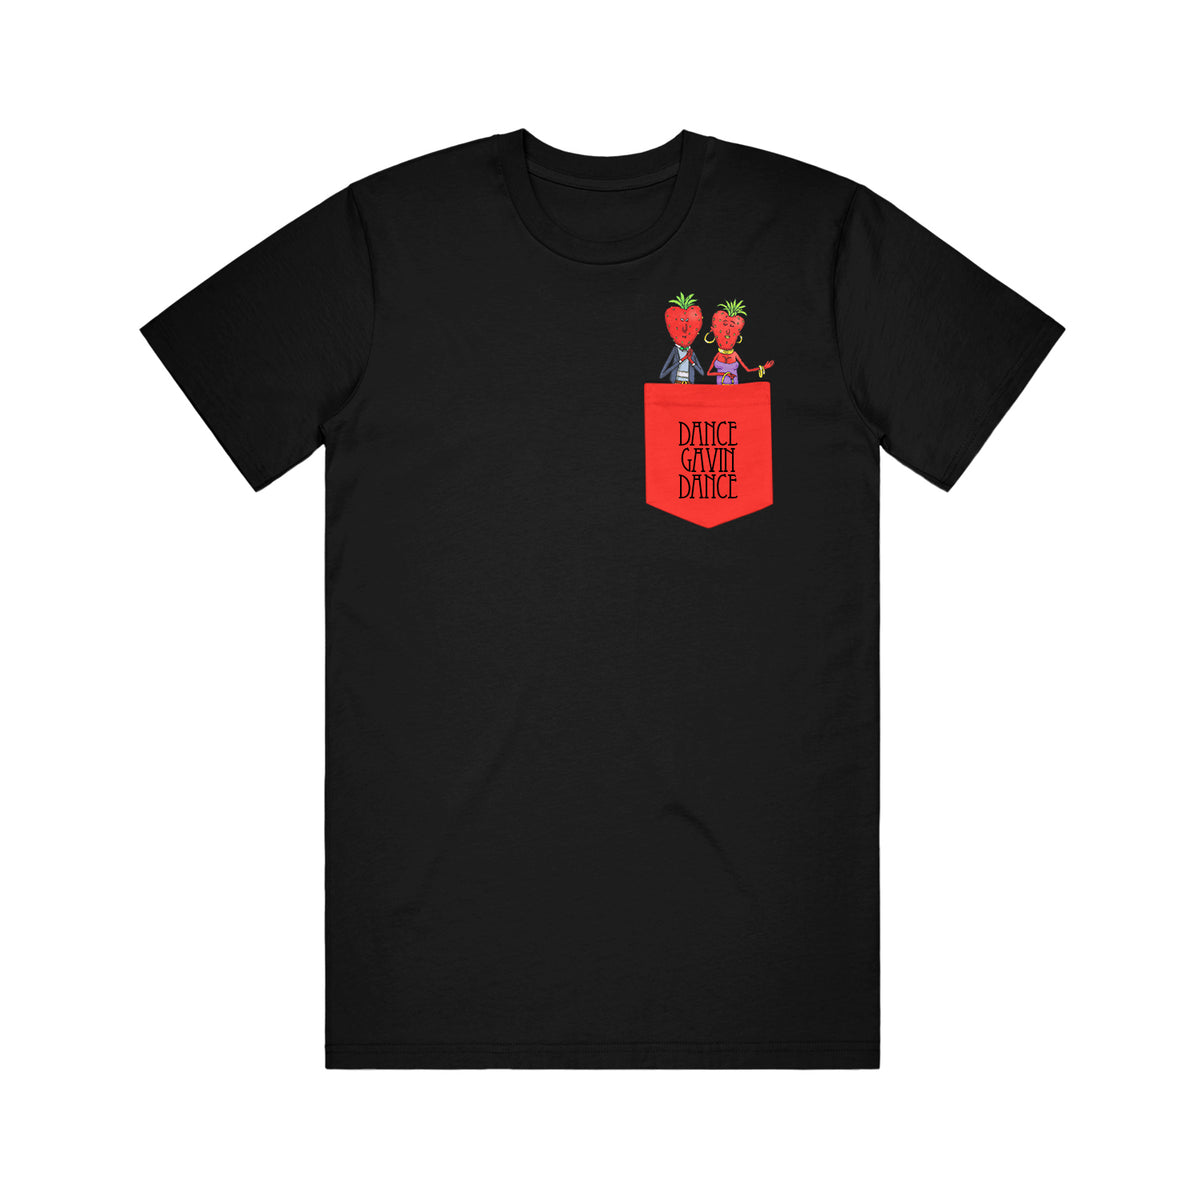 image of a black tee shirt on a white background. printed pocket on right with the strwberry couple characters coming out of it.